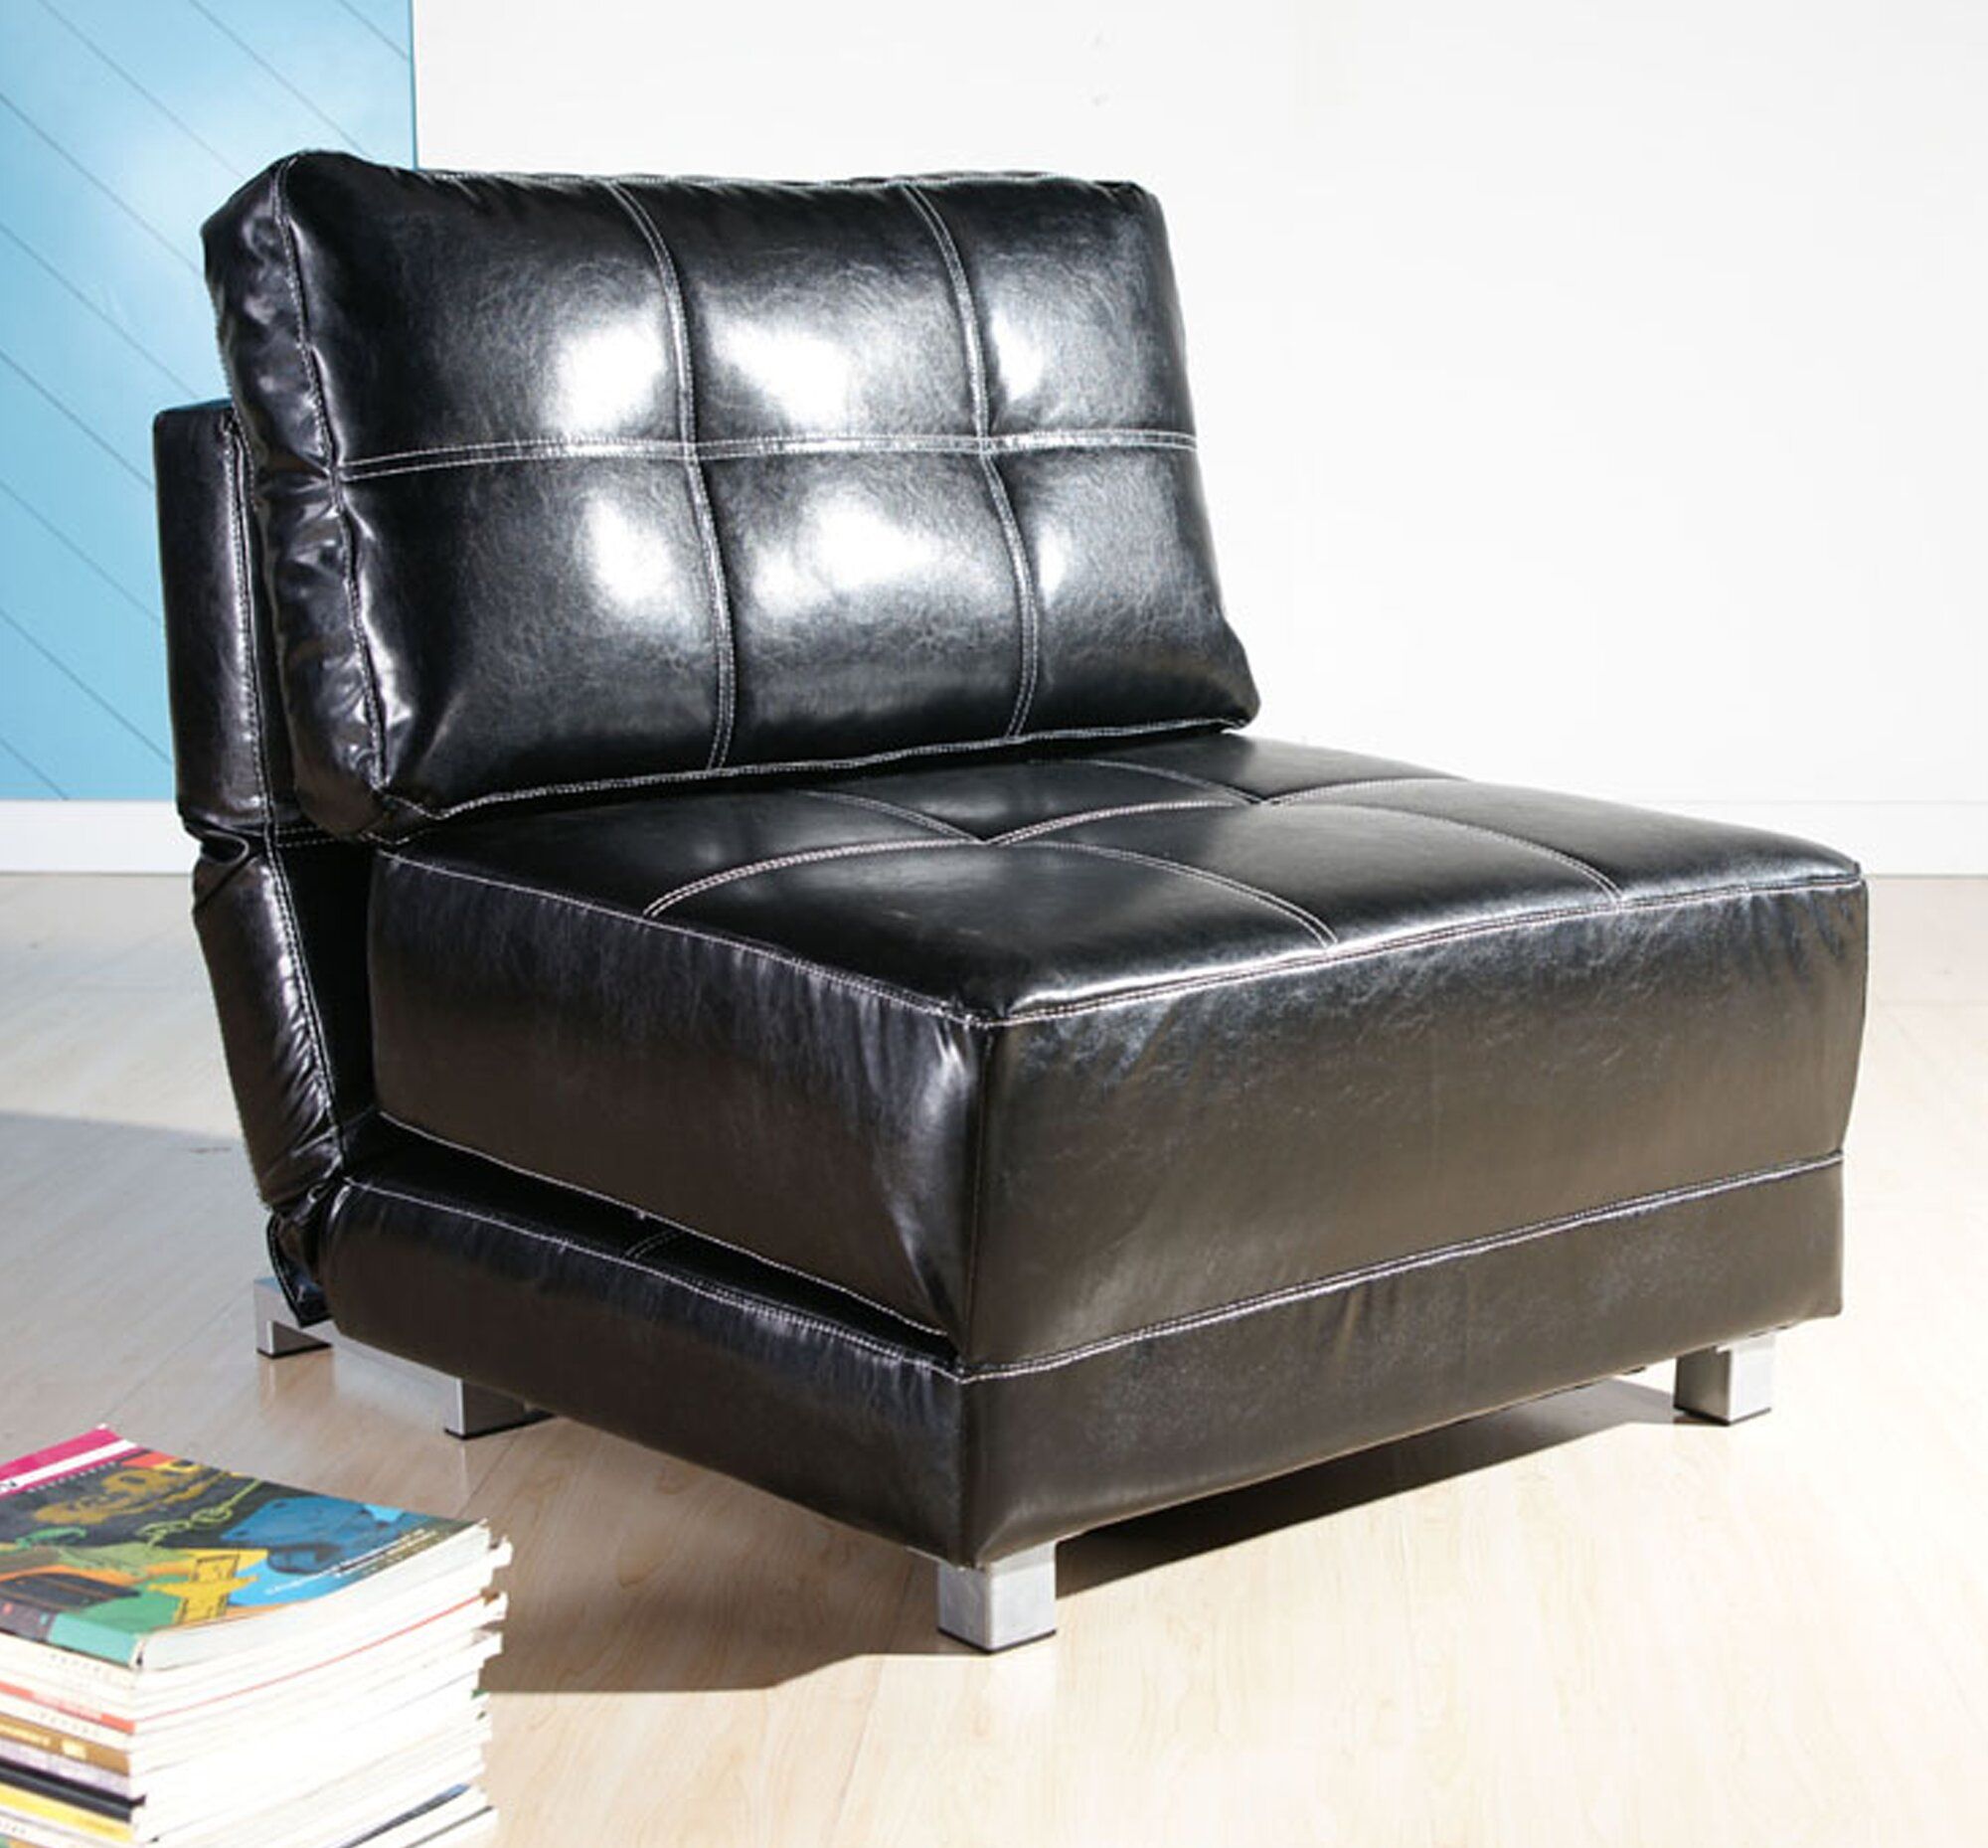 Hersey 31.5" W Tufted Faux Leather Convertible Chair Inside Perz Tufted Faux Leather Convertible Chairs (Photo 3 of 15)